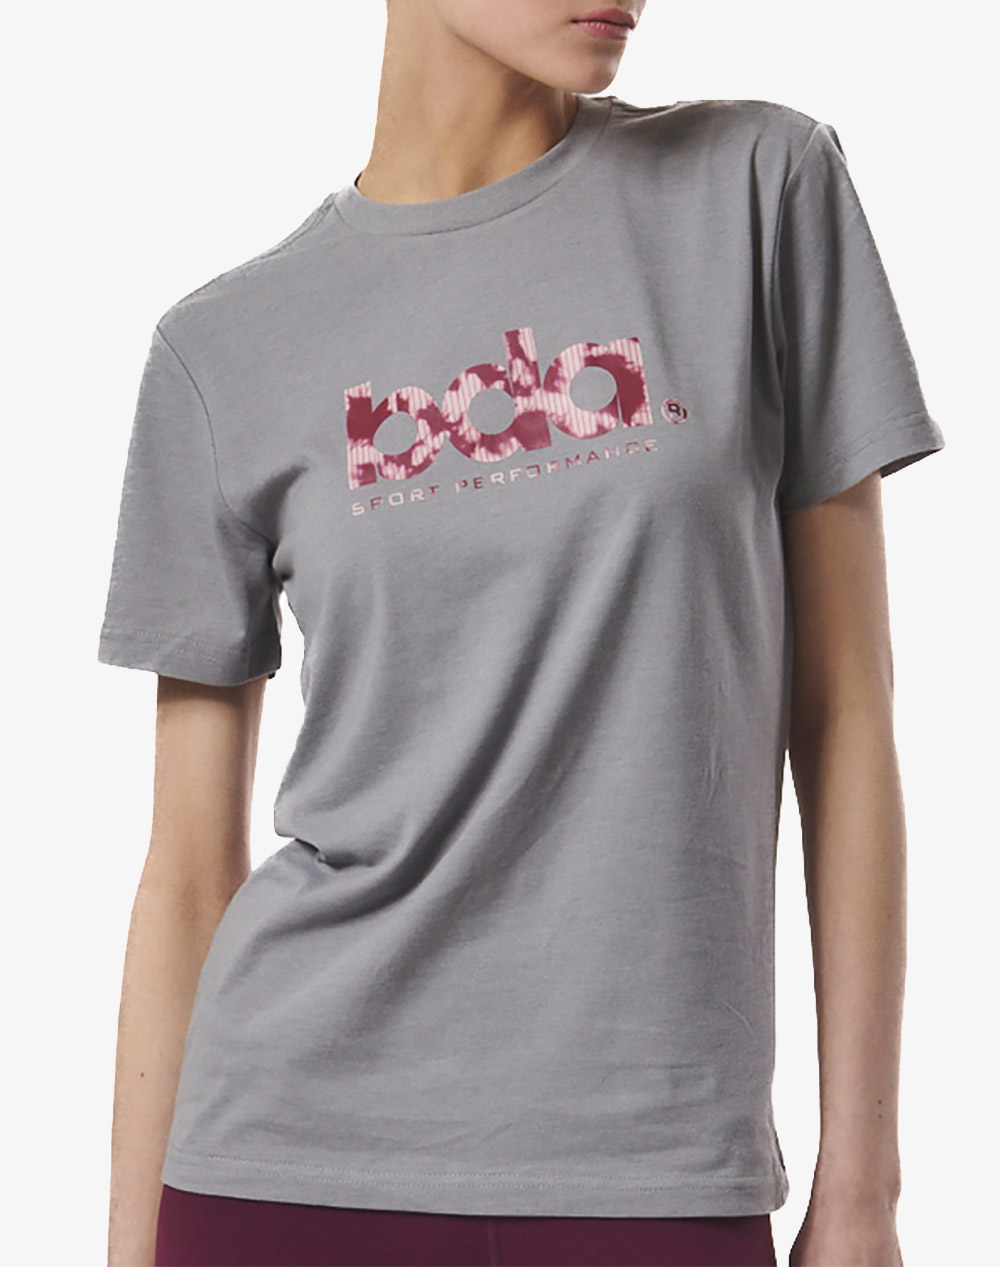 BODY ACTION WOMEN”S ESSENTIAL BRANDED TEE 051420-01-SILVER GREY LightGray